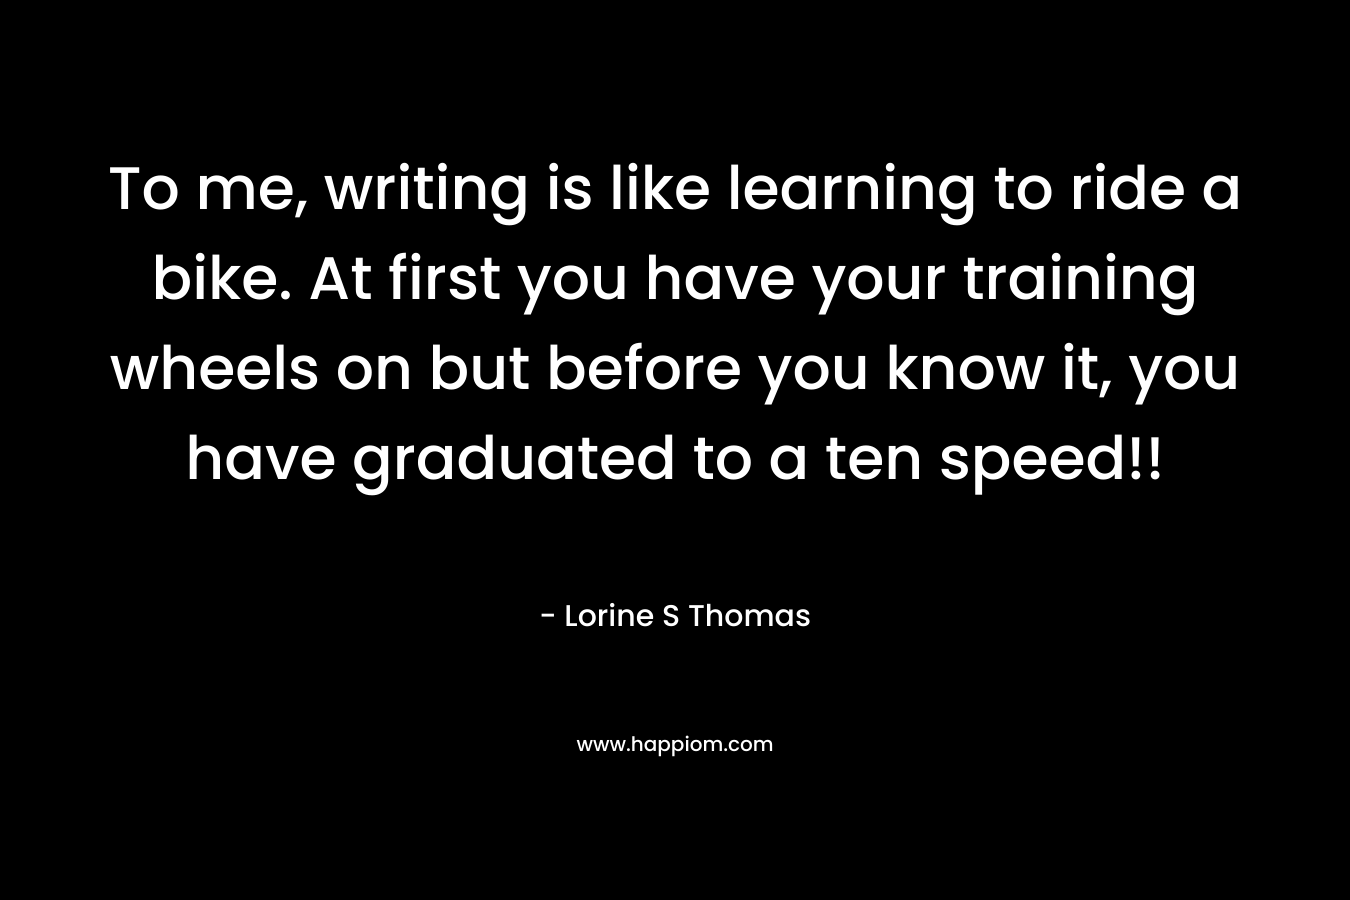 To me, writing is like learning to ride a bike. At first you have your training wheels on but before you know it, you have graduated to a ten speed!! – Lorine S Thomas